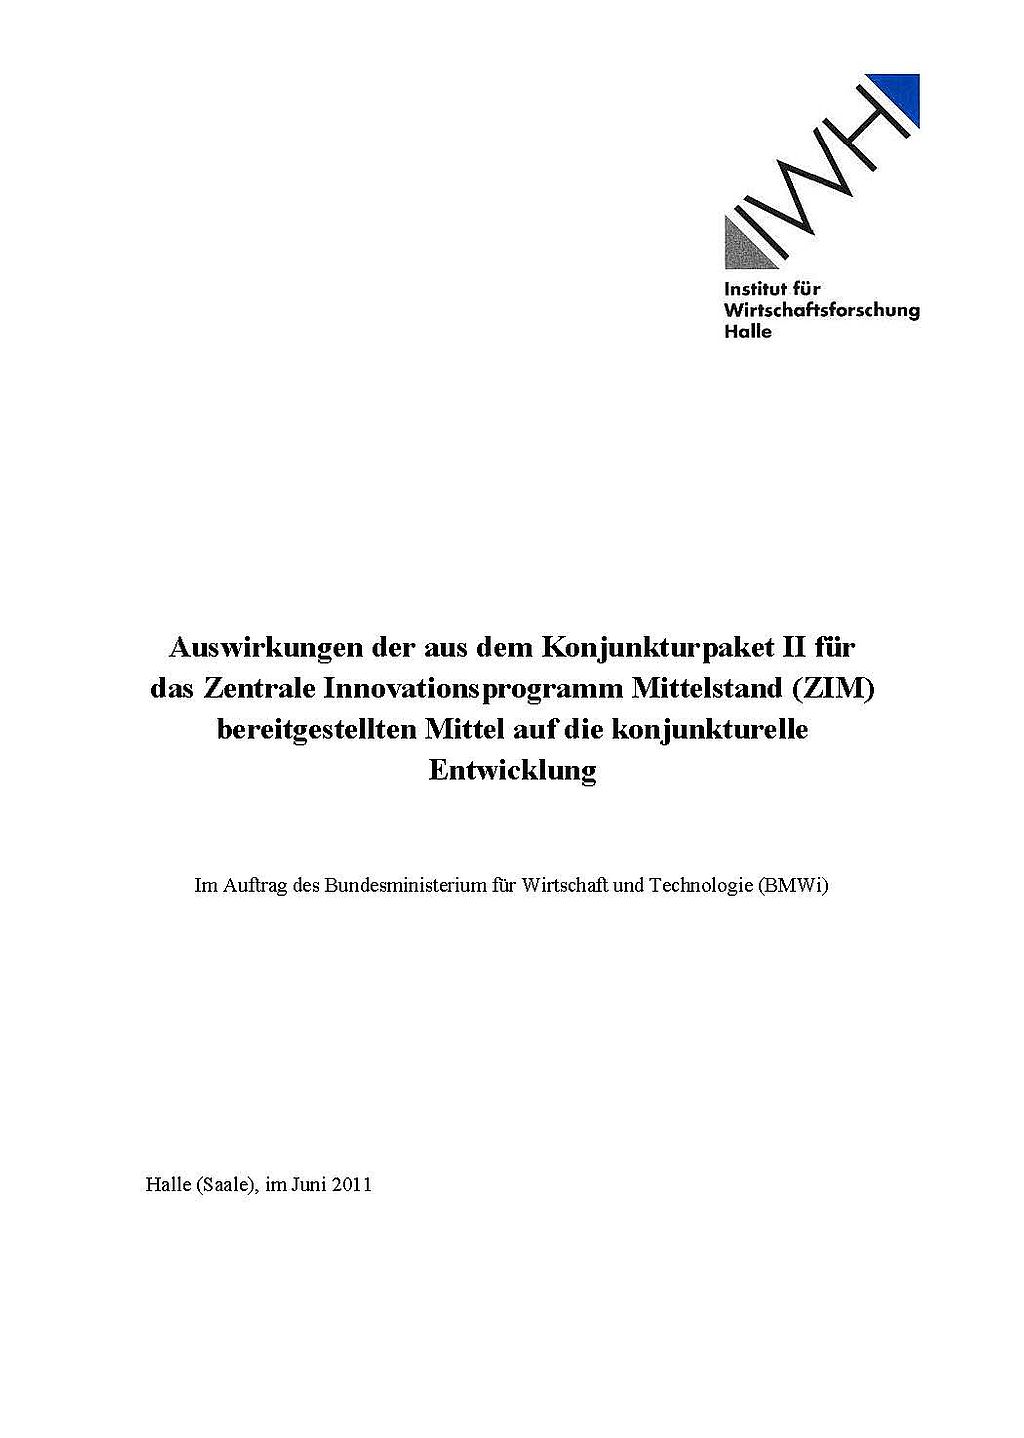 cover_2011_guenther_ludwig_et_al_zim_evaluation.jpg